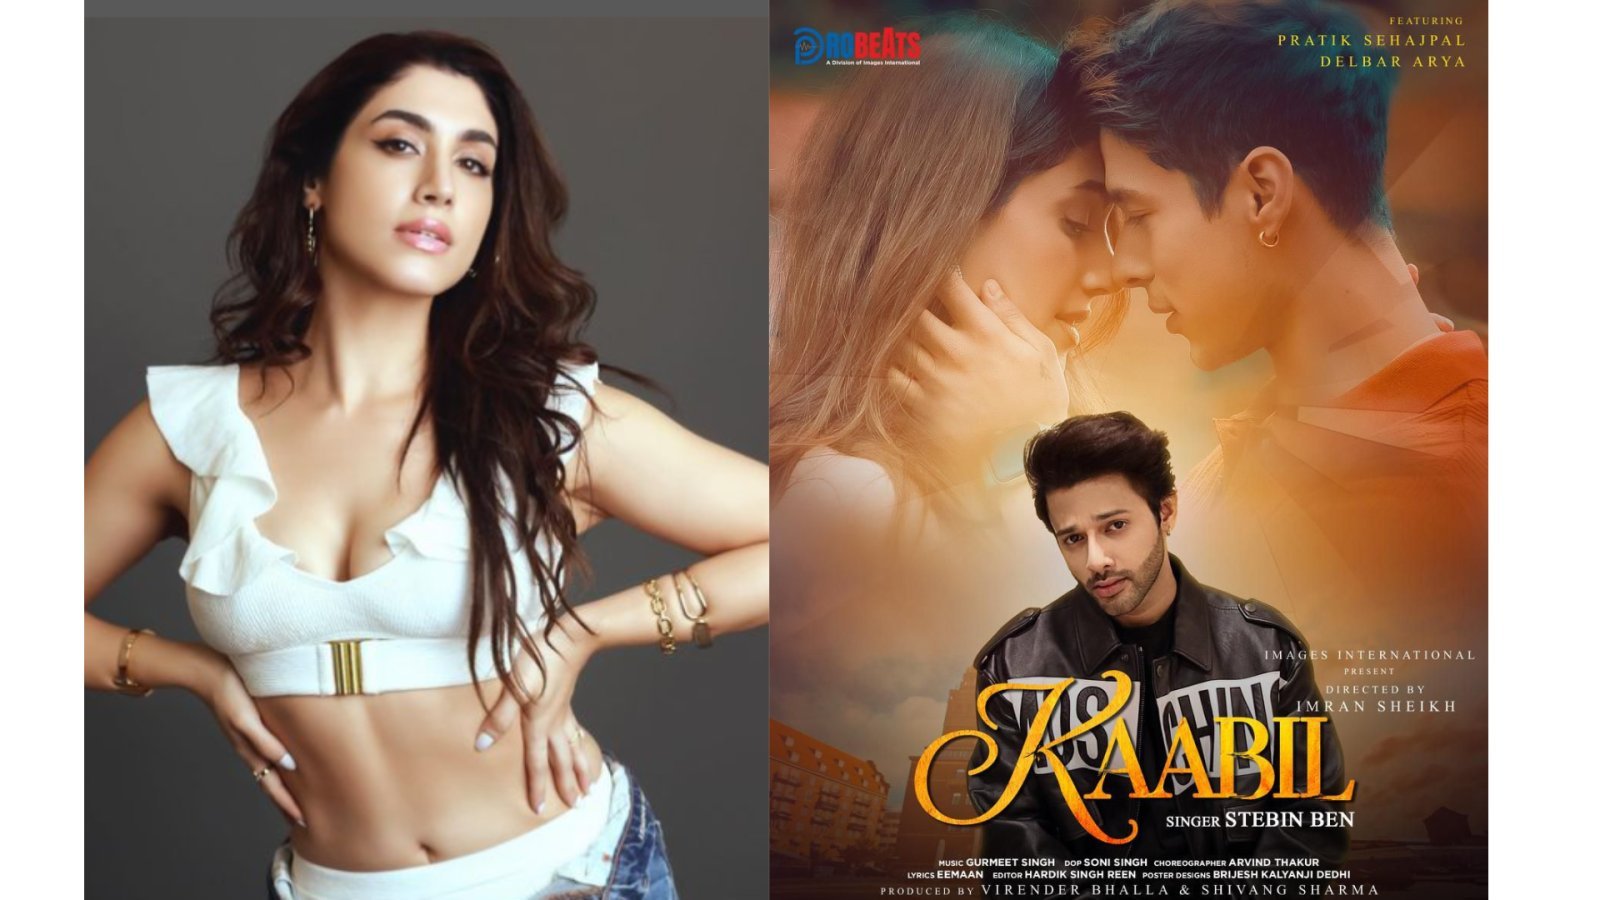 Delbar Arya and Pratik Sehajpal Bring us the Heartbreak Anthem of the Year 'KAABIL' with Stebin Ben's Voice - Check the Poster Now